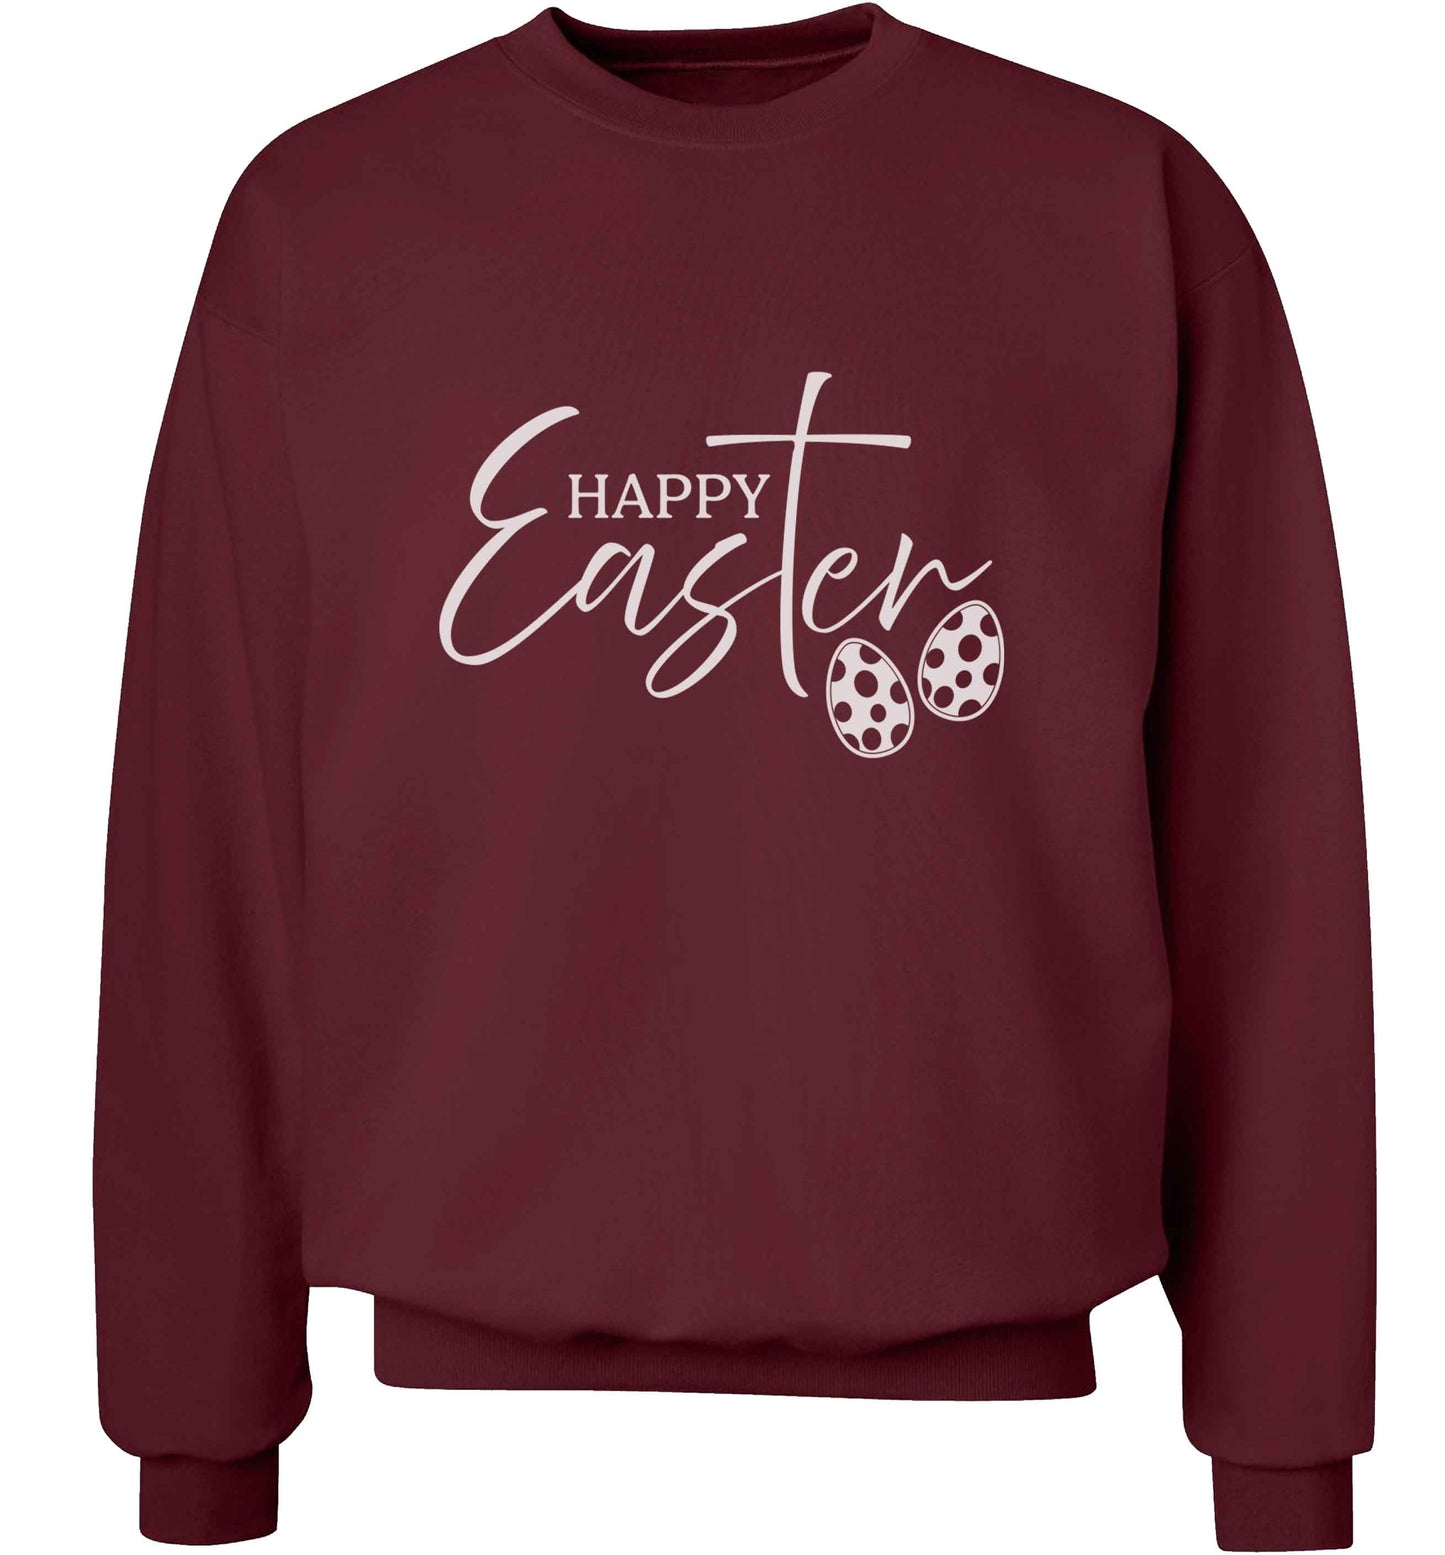 Happy Easter adult's unisex maroon sweater 2XL